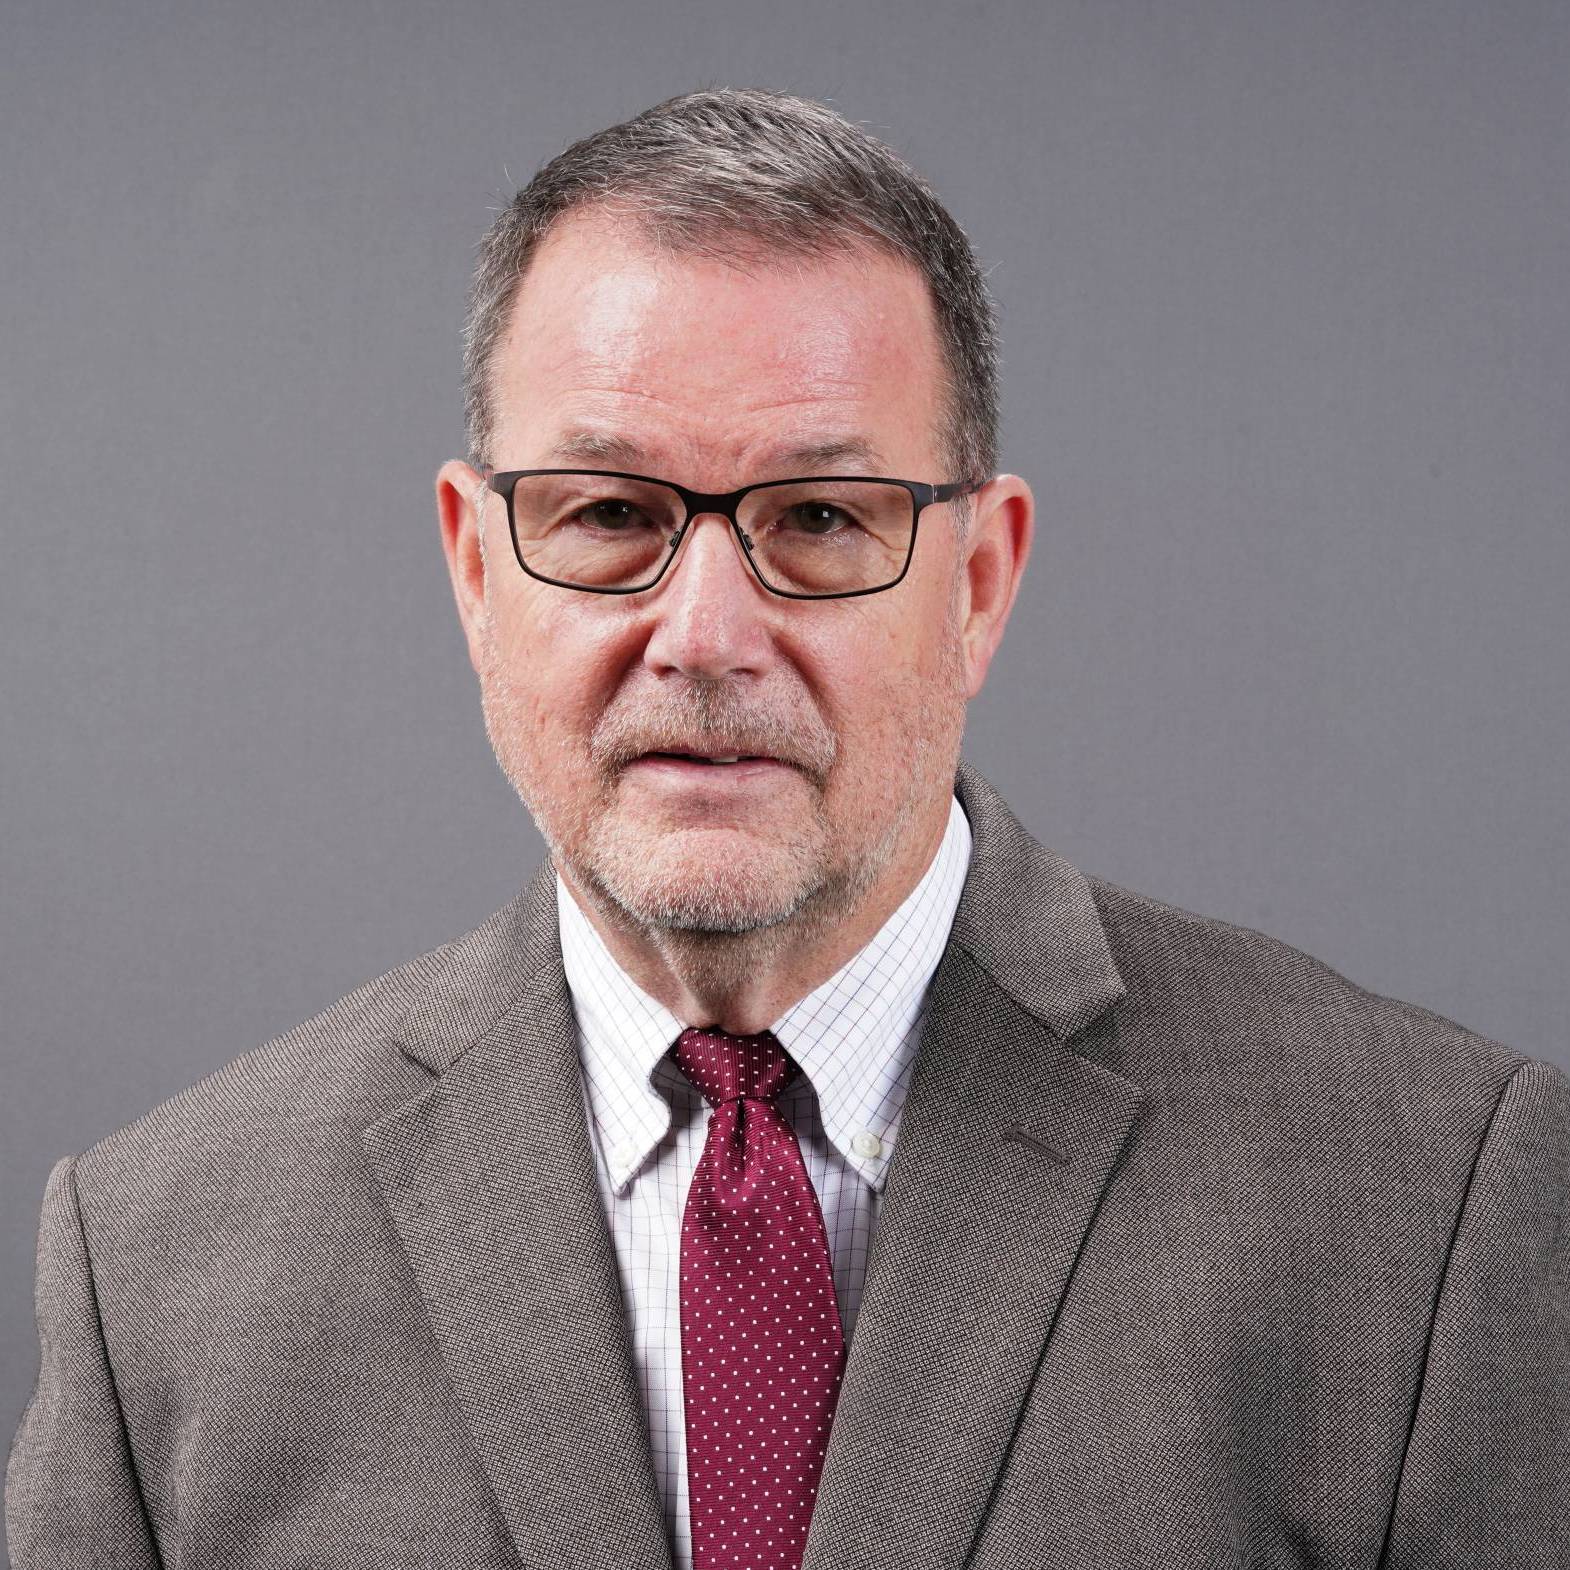 middle-age white man with brown hair and glasses wearing a brown suit jacket with a red tie